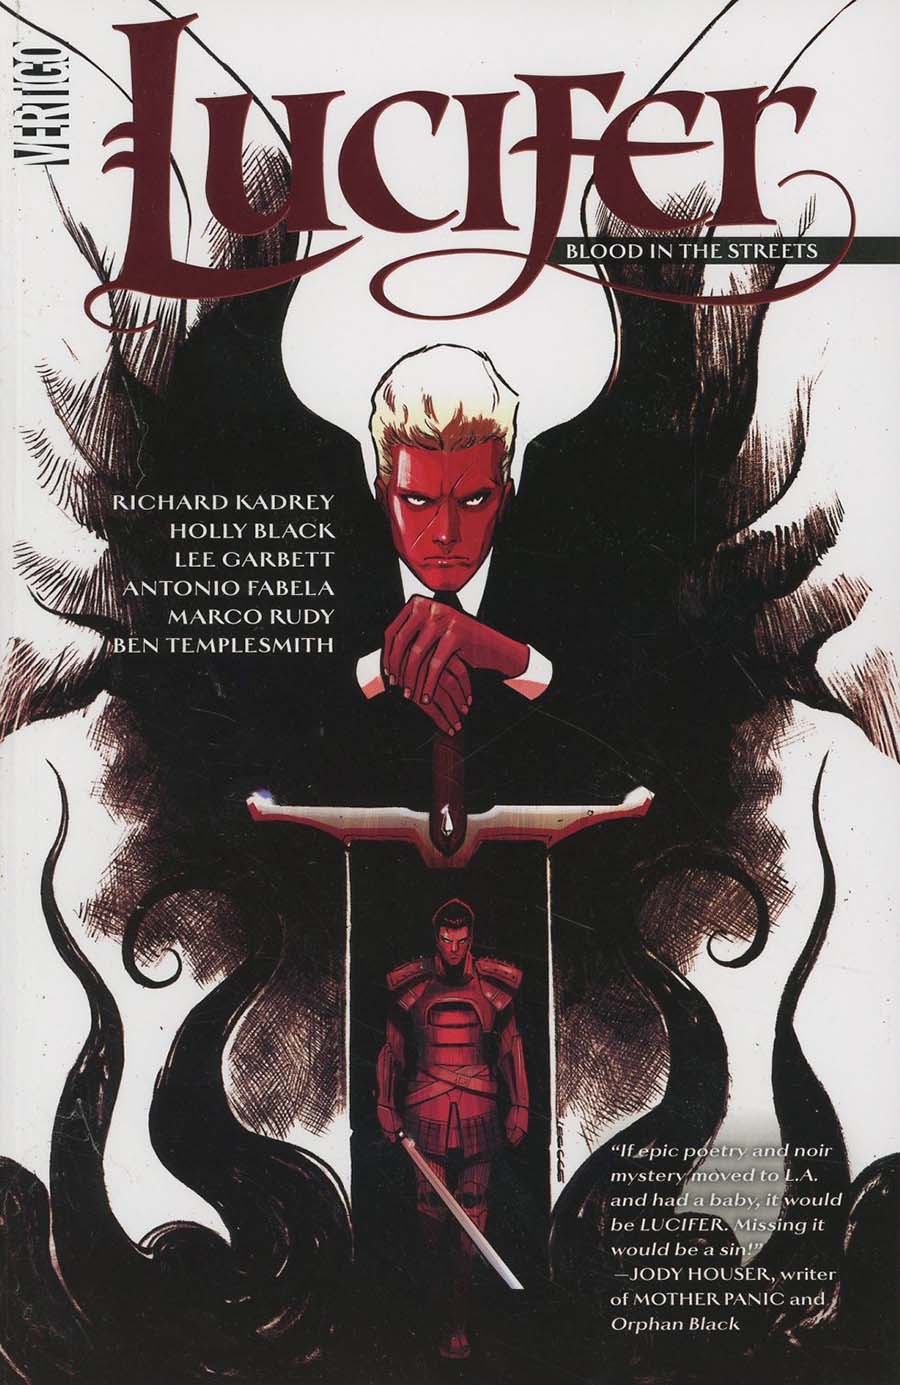 Lucifer (2015) Vol 3 Blood In The Streets TP